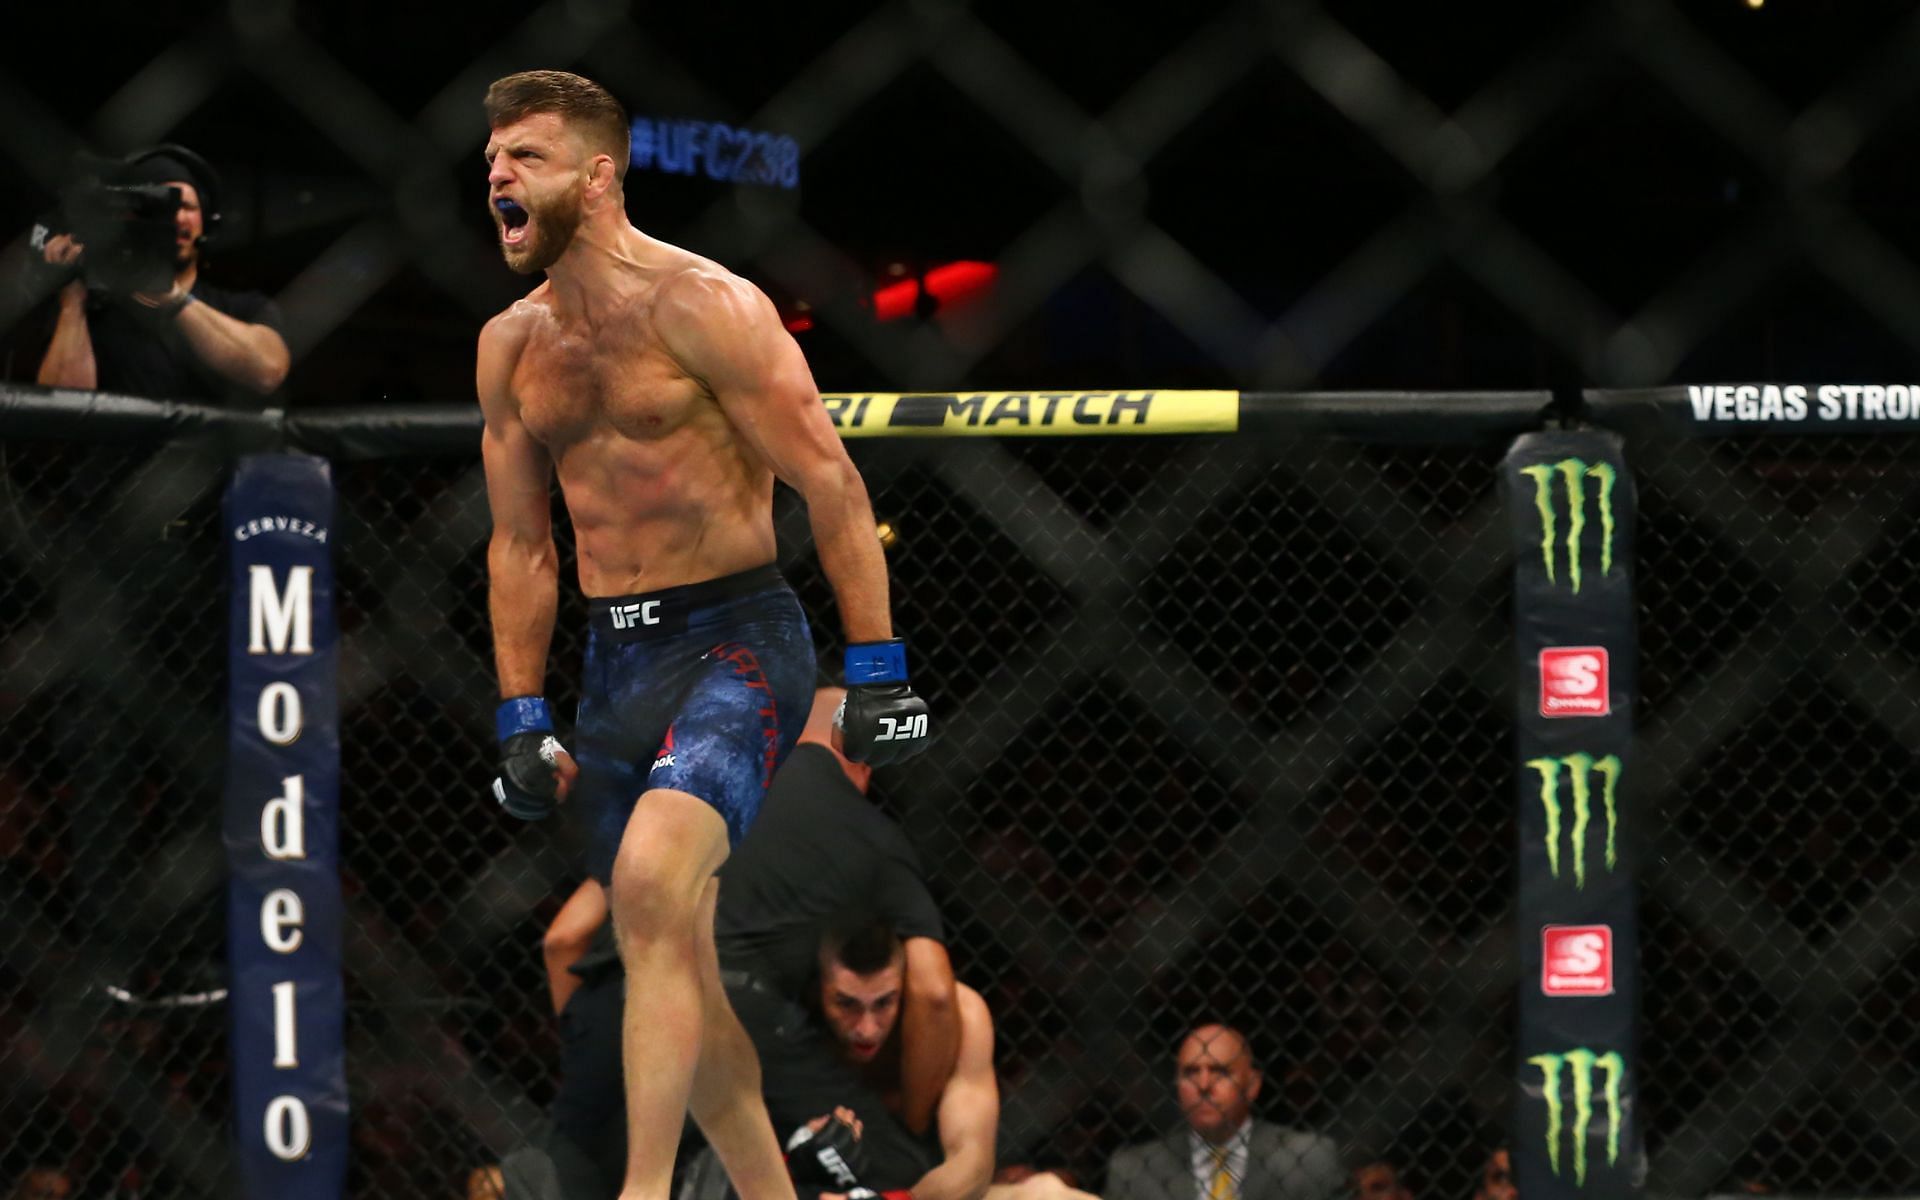 Calvin Kattar (left) celebrates his knock out victory over Ricardo Lamas at UFC 238 in June 2019